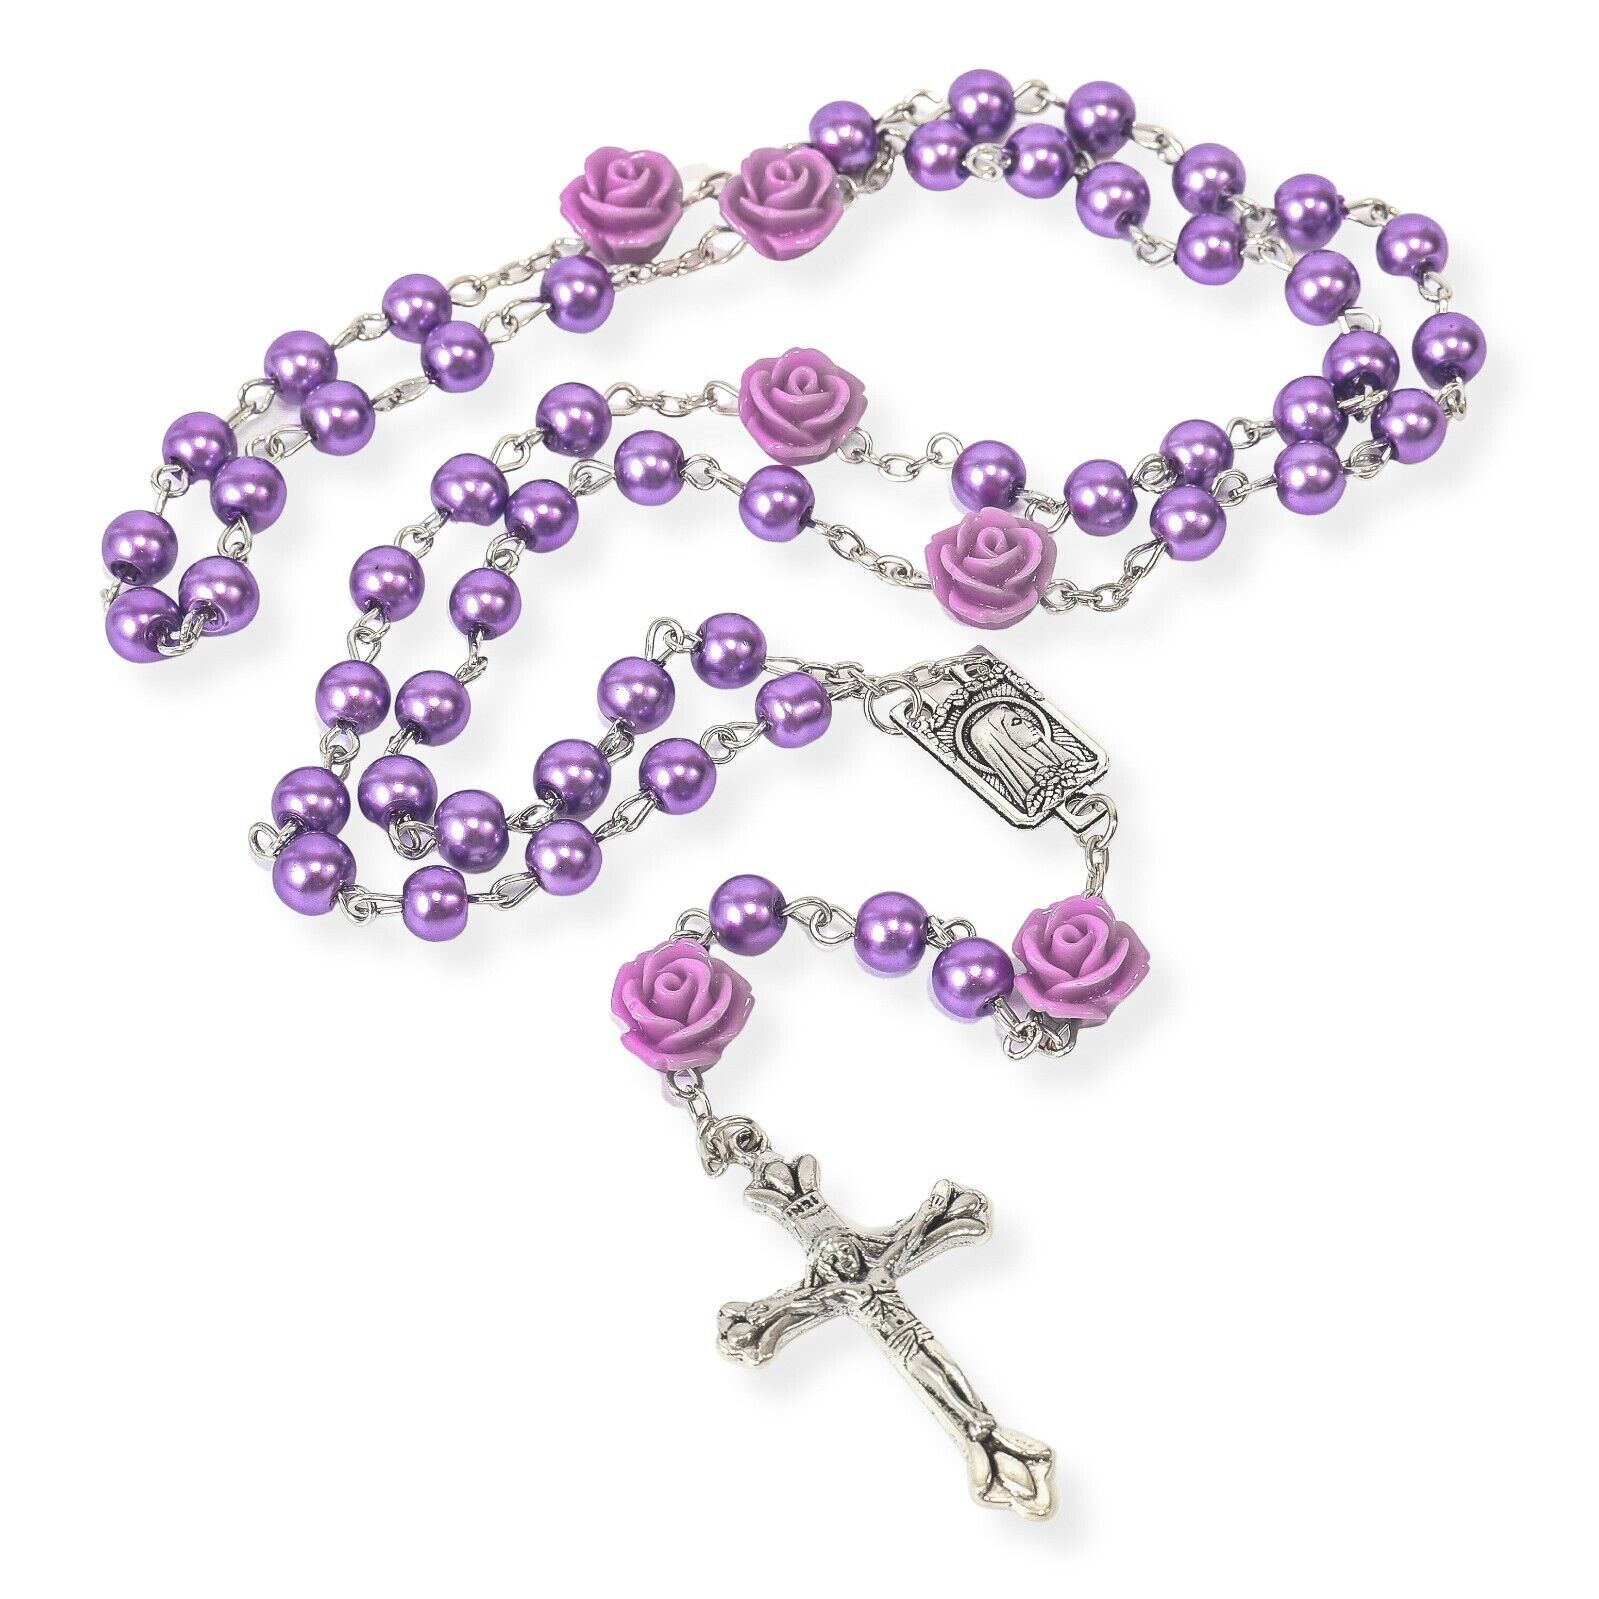 Catholic Purple Pearl Beads Rosary Necklace Rose Lourdes Medal Cross